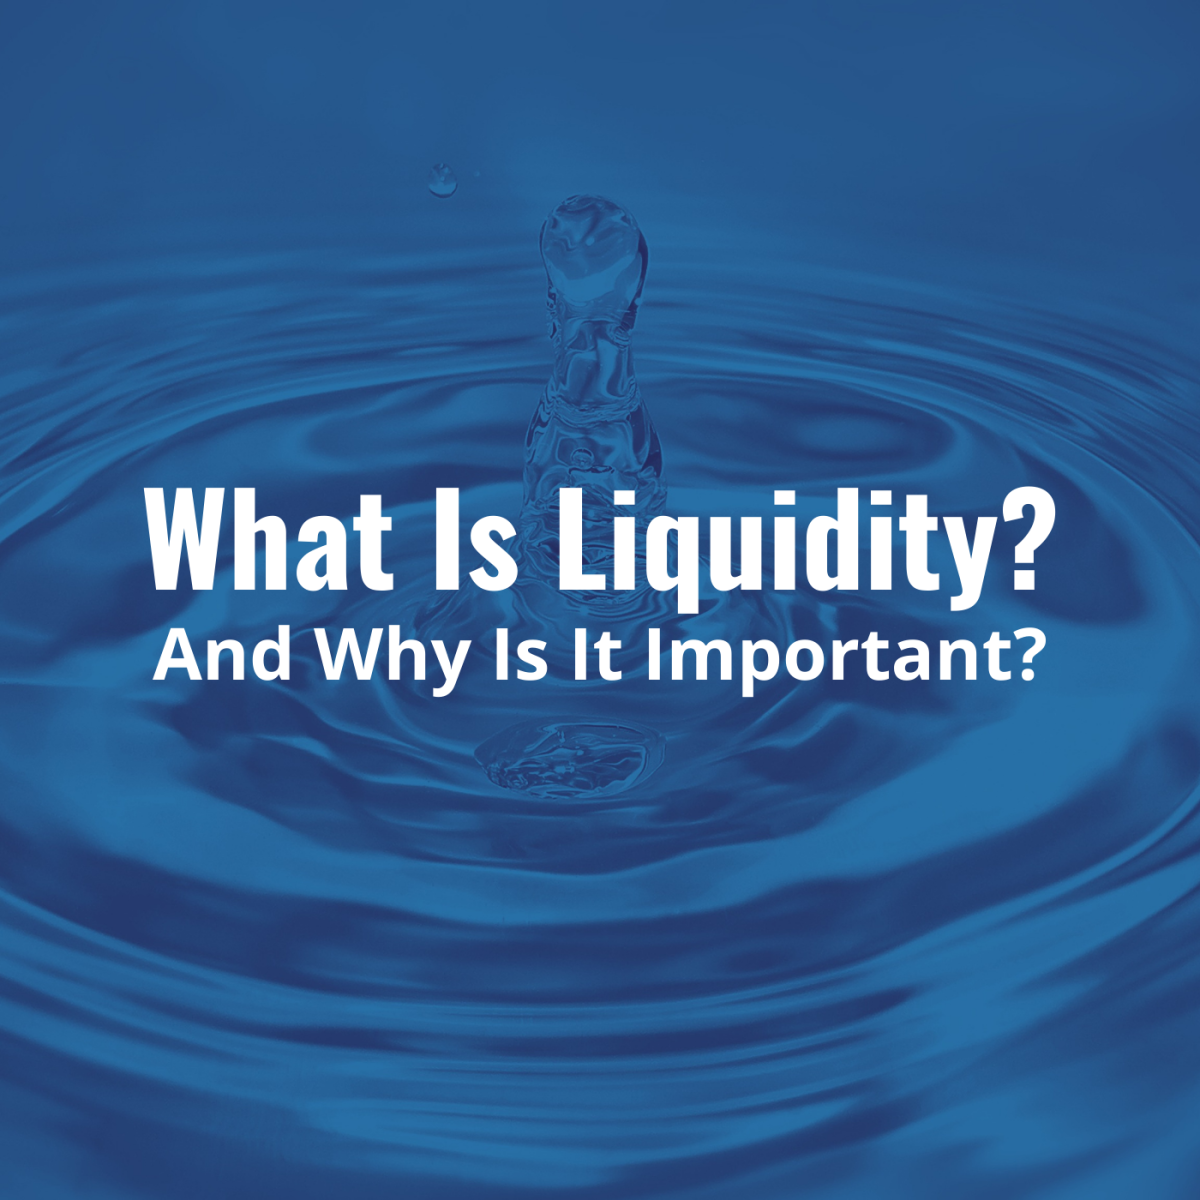 Image of ripples of water with the text overlay: "What Is Liquidity? And Why Is It Important?"